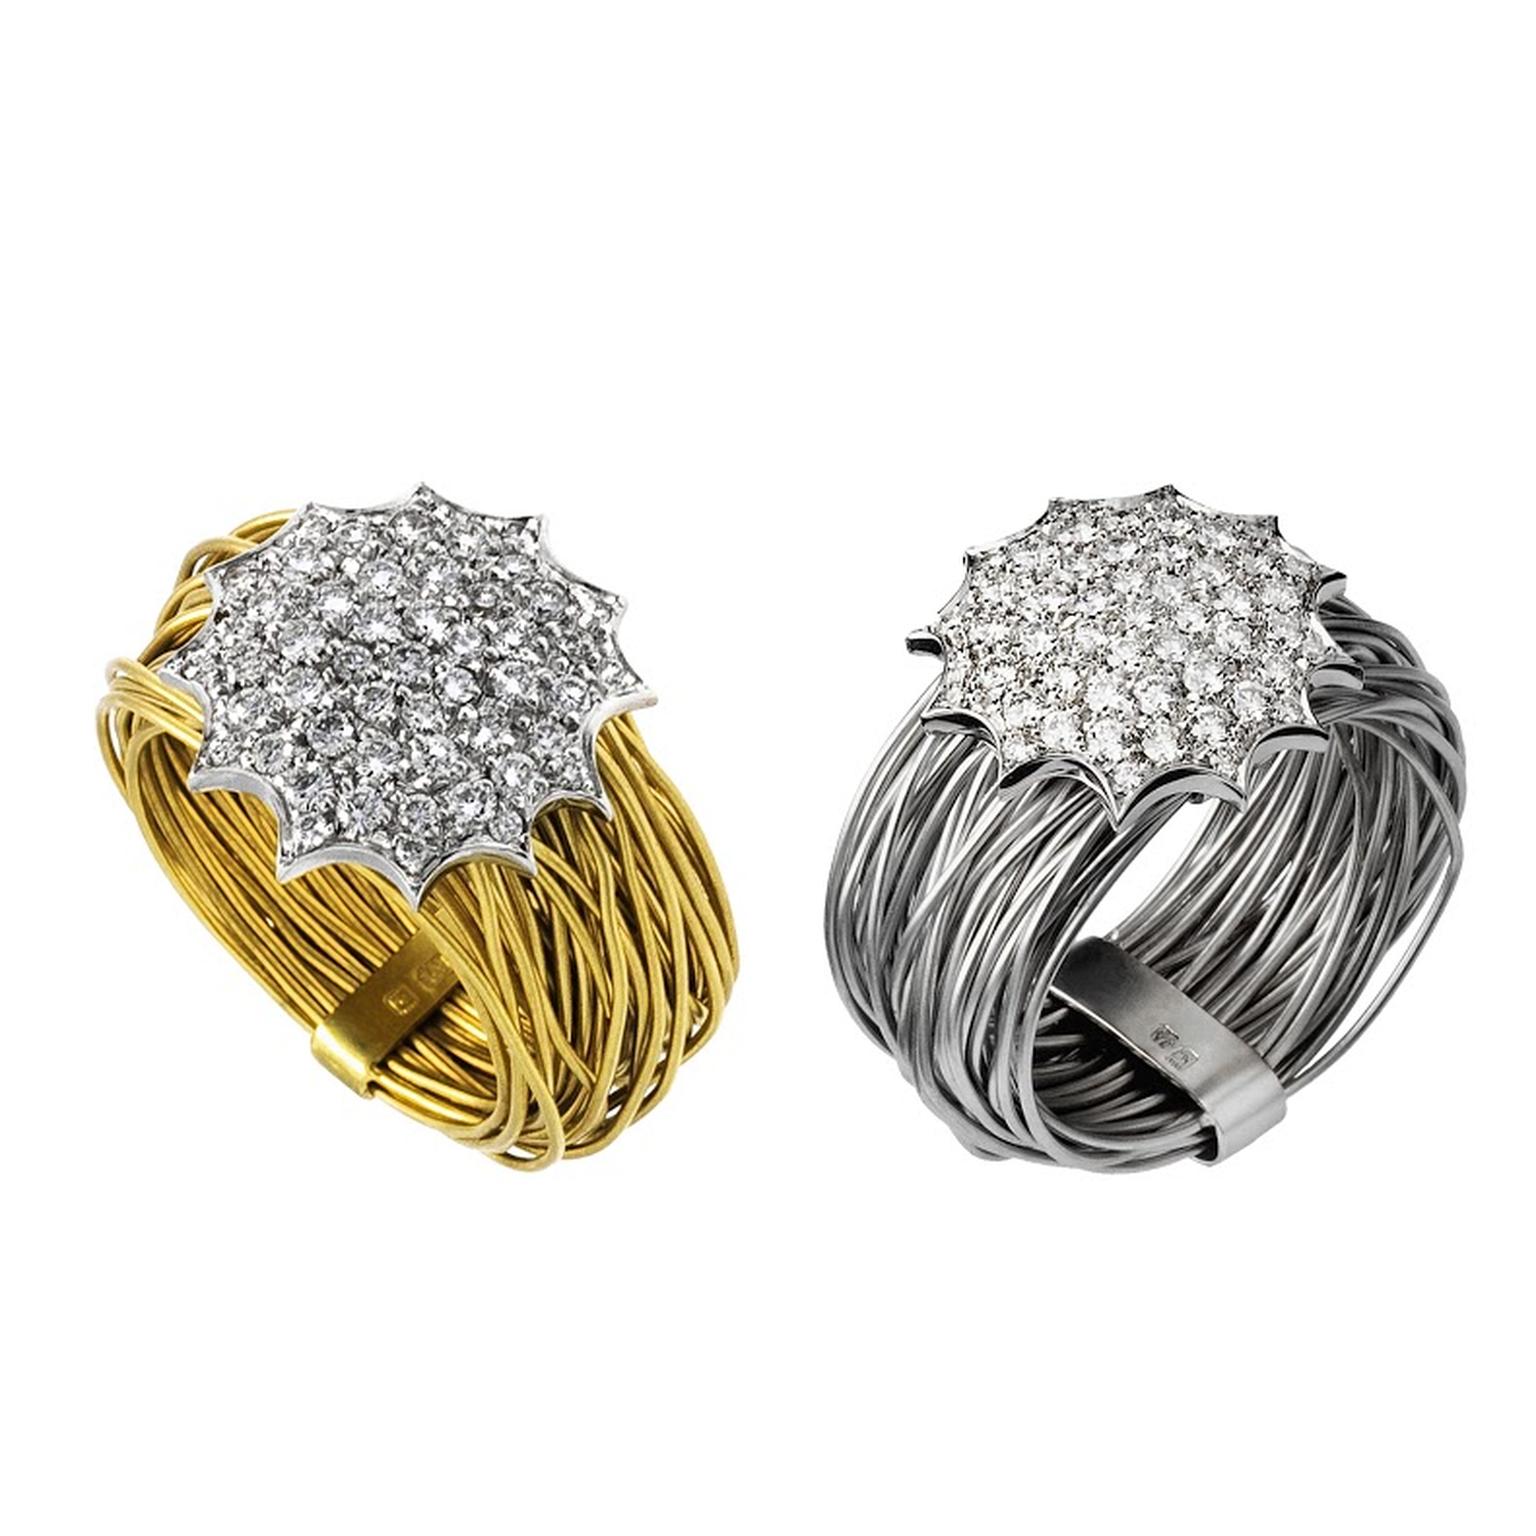 Mimata Nest rings in in yellow and white gold with diamonds, from the Stars collection.